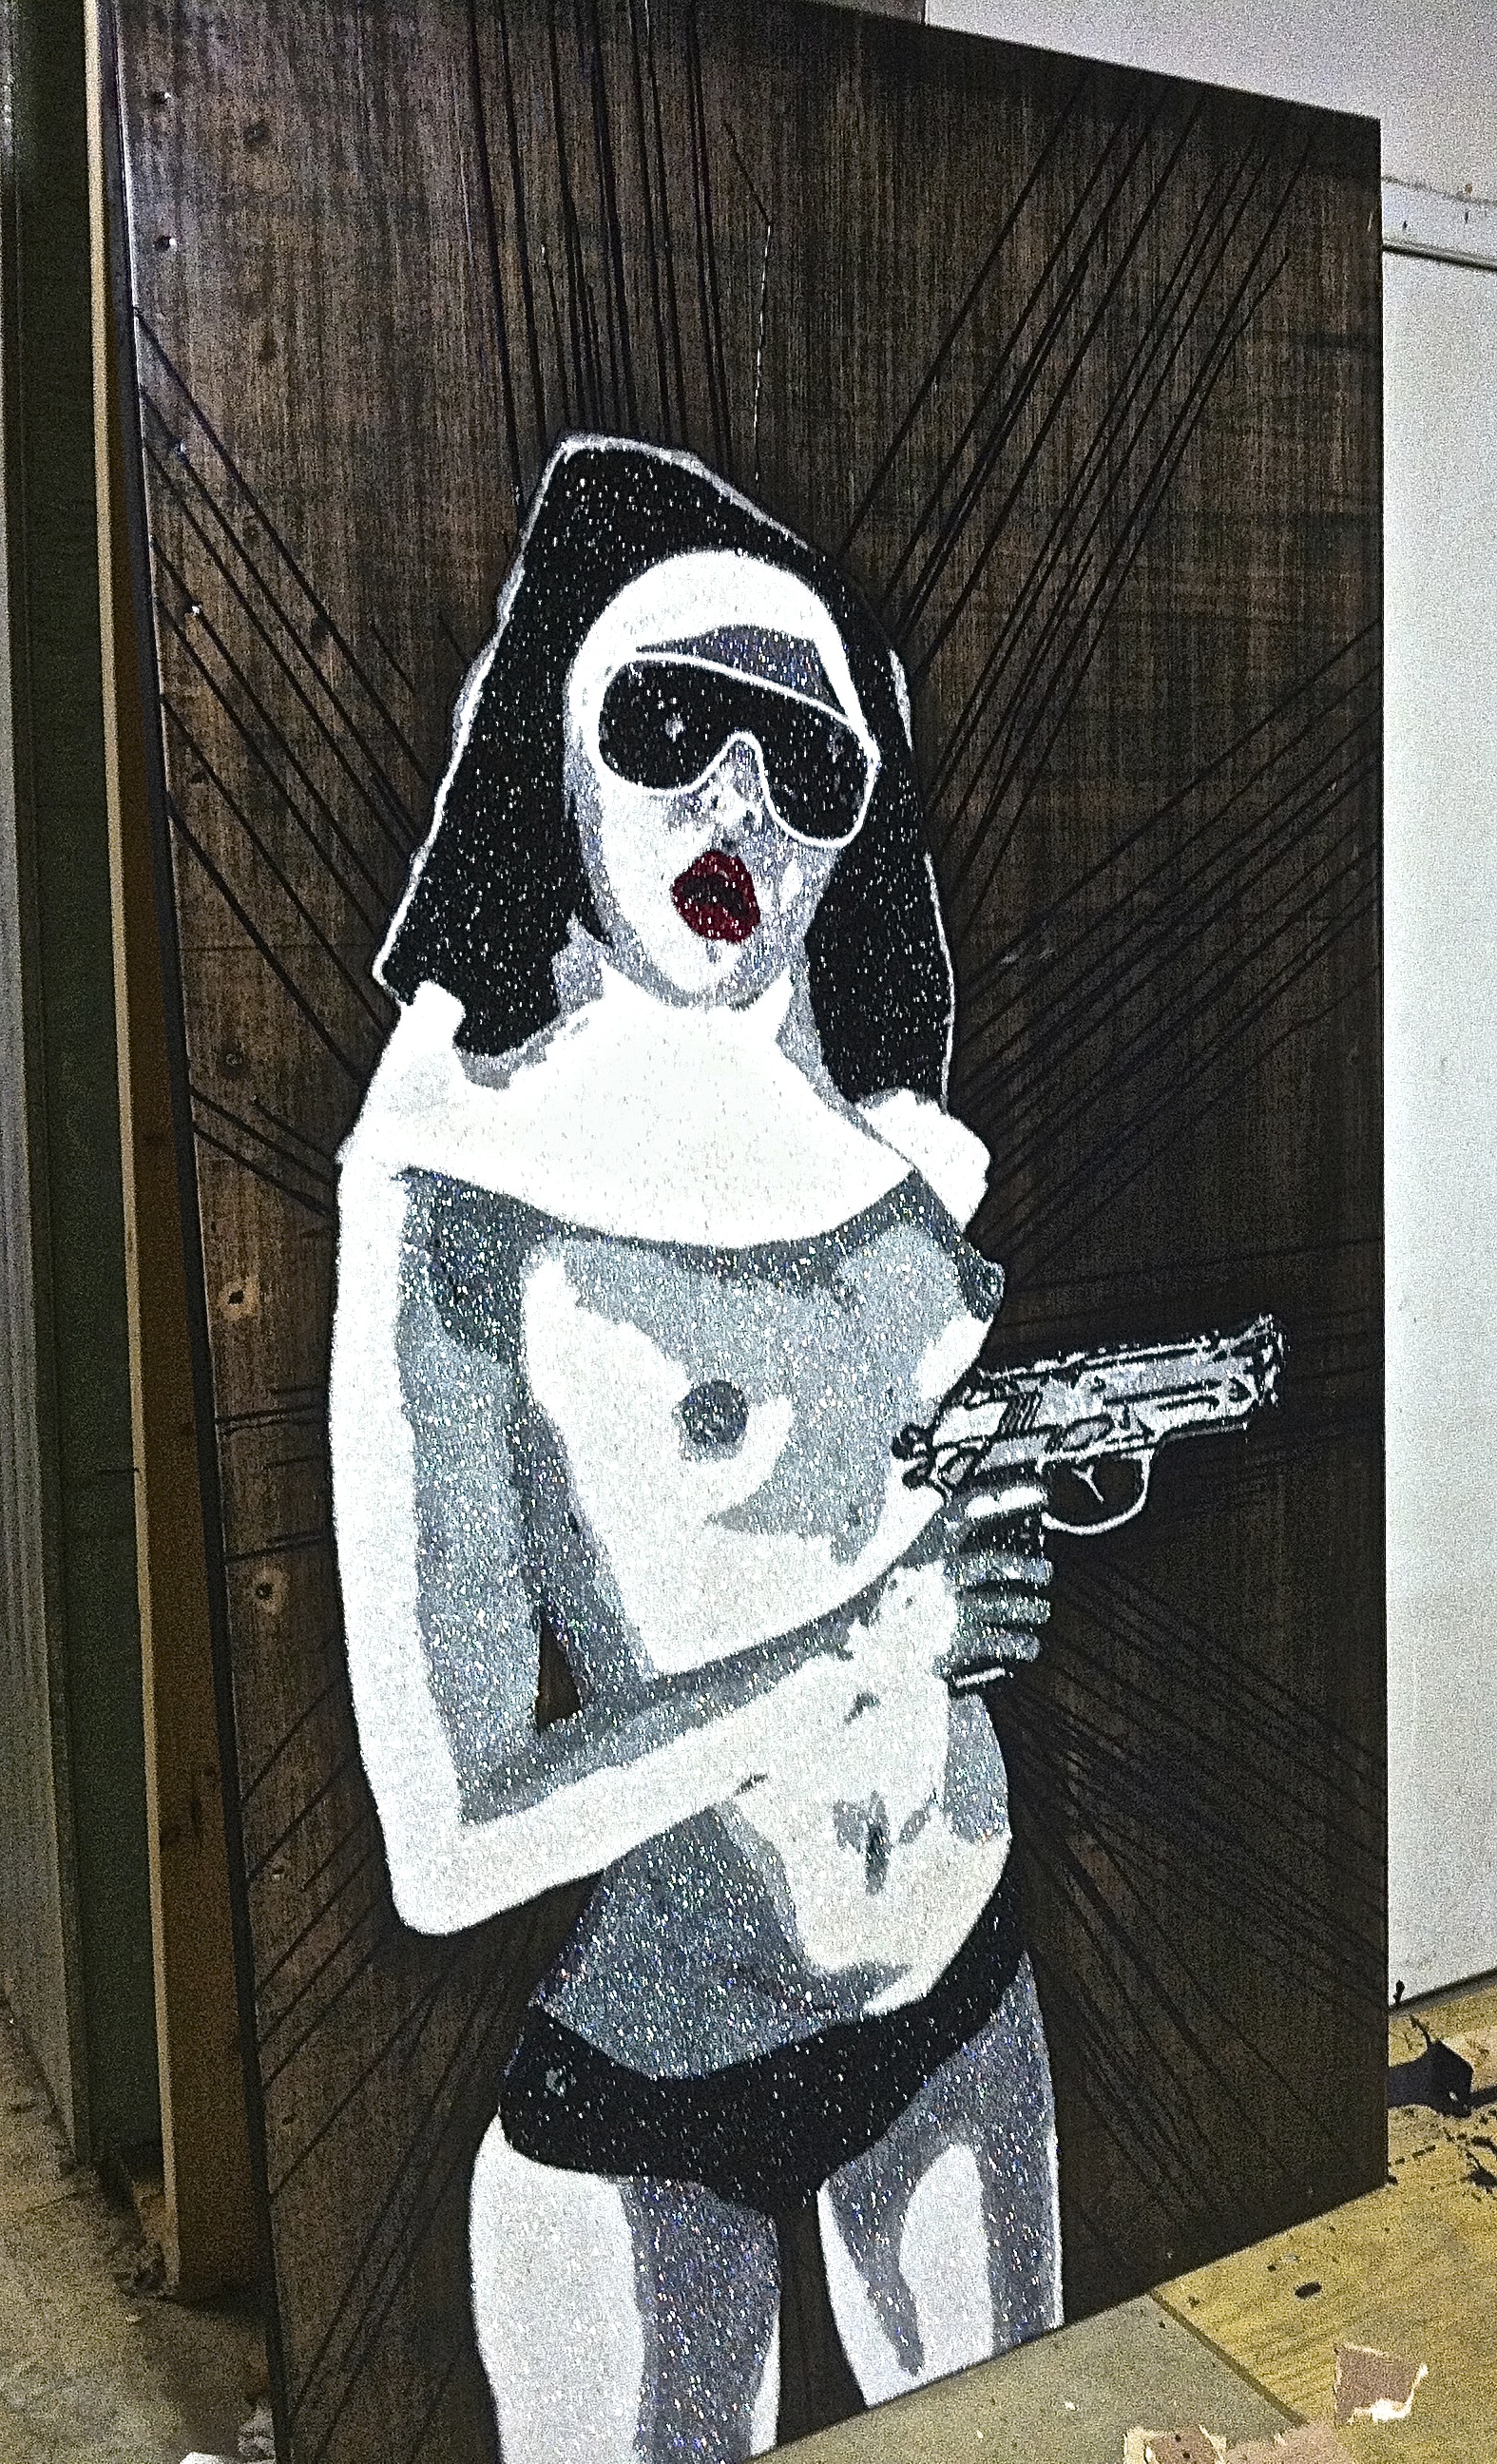  Nun With A Gun #2  glitter on plywood  48'' x 84''  SOLD   CONTACT FOR MORE INFO  